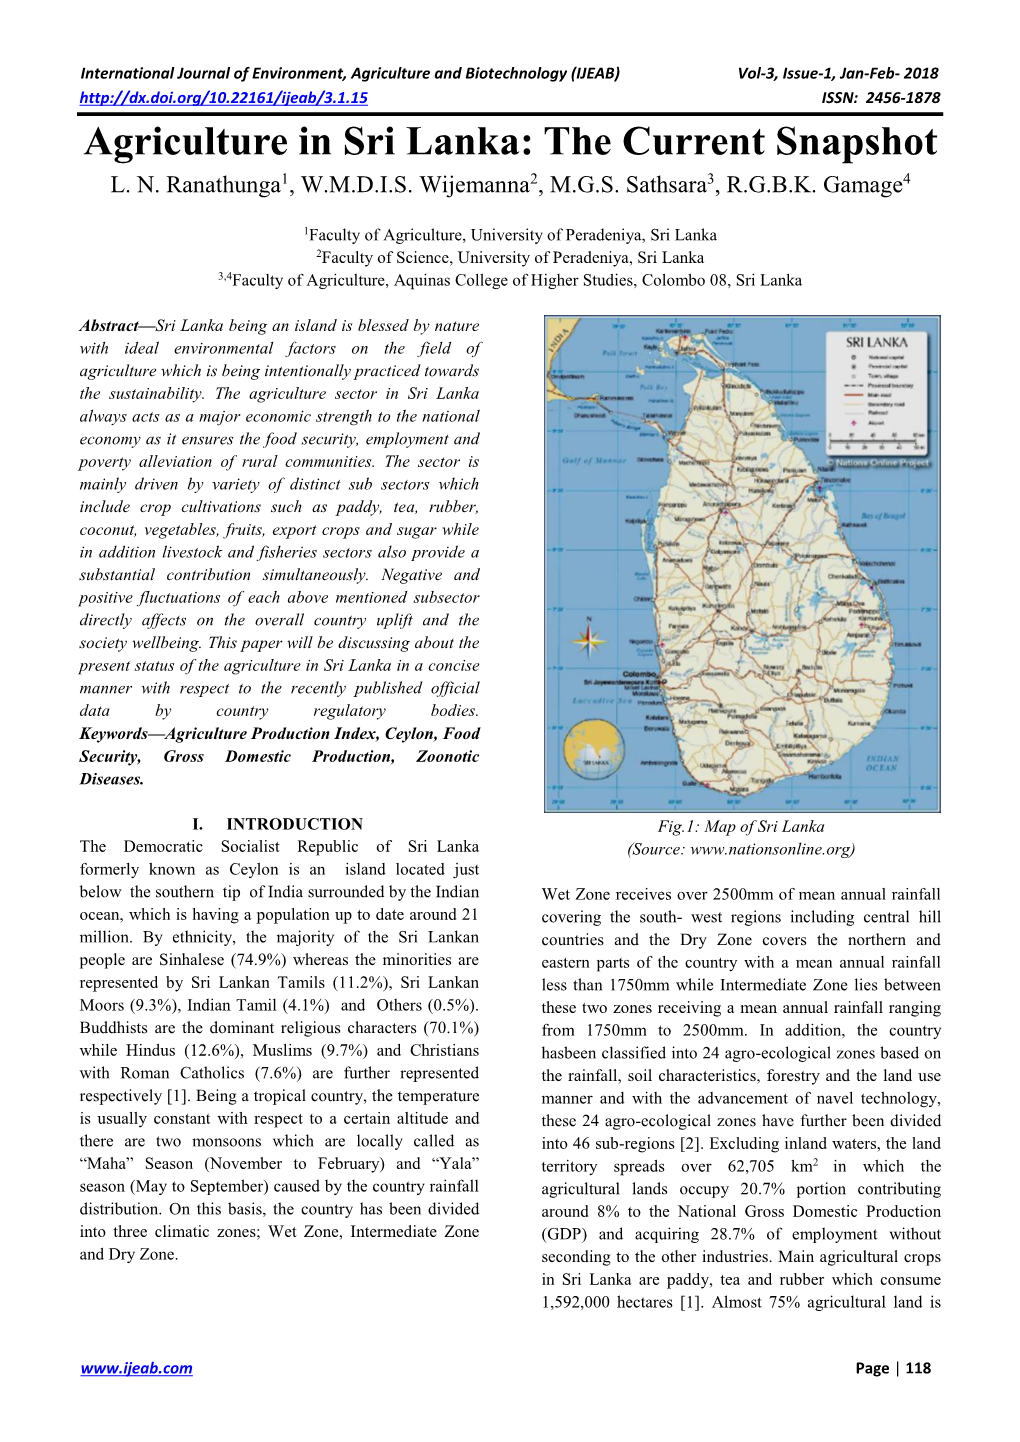 Agriculture in Sri Lanka: the Current Snapshot L